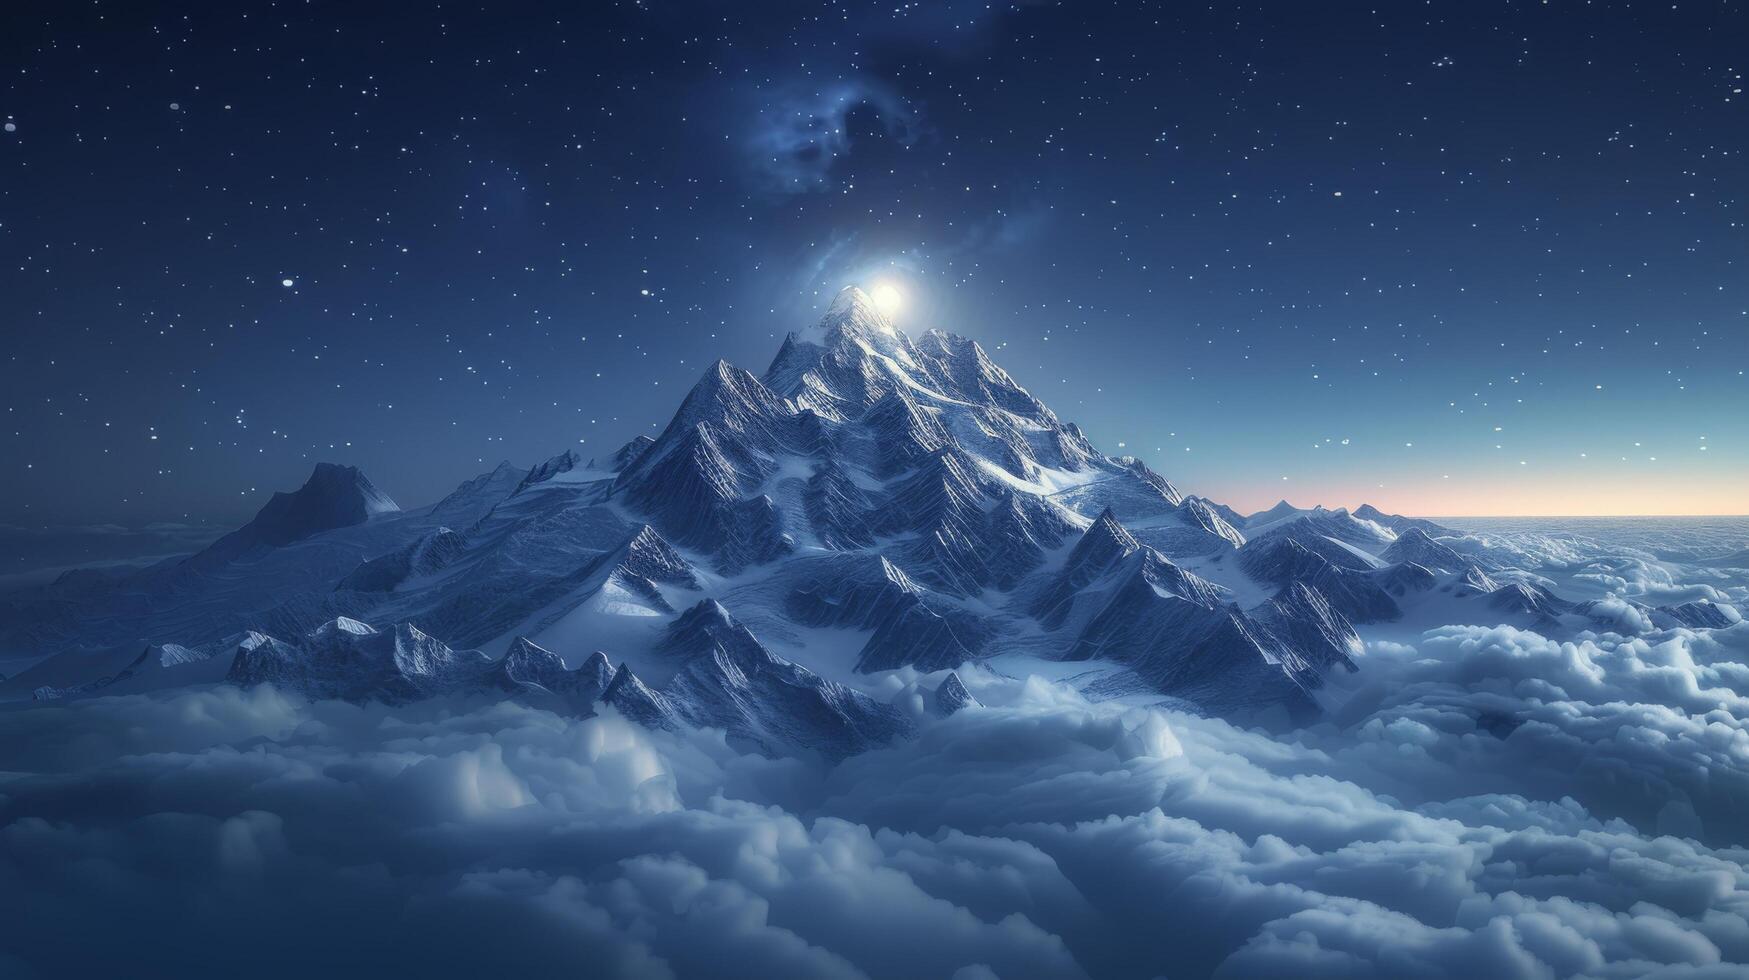 AI generated Moonlit Mountain Shrouded in Clouds photo